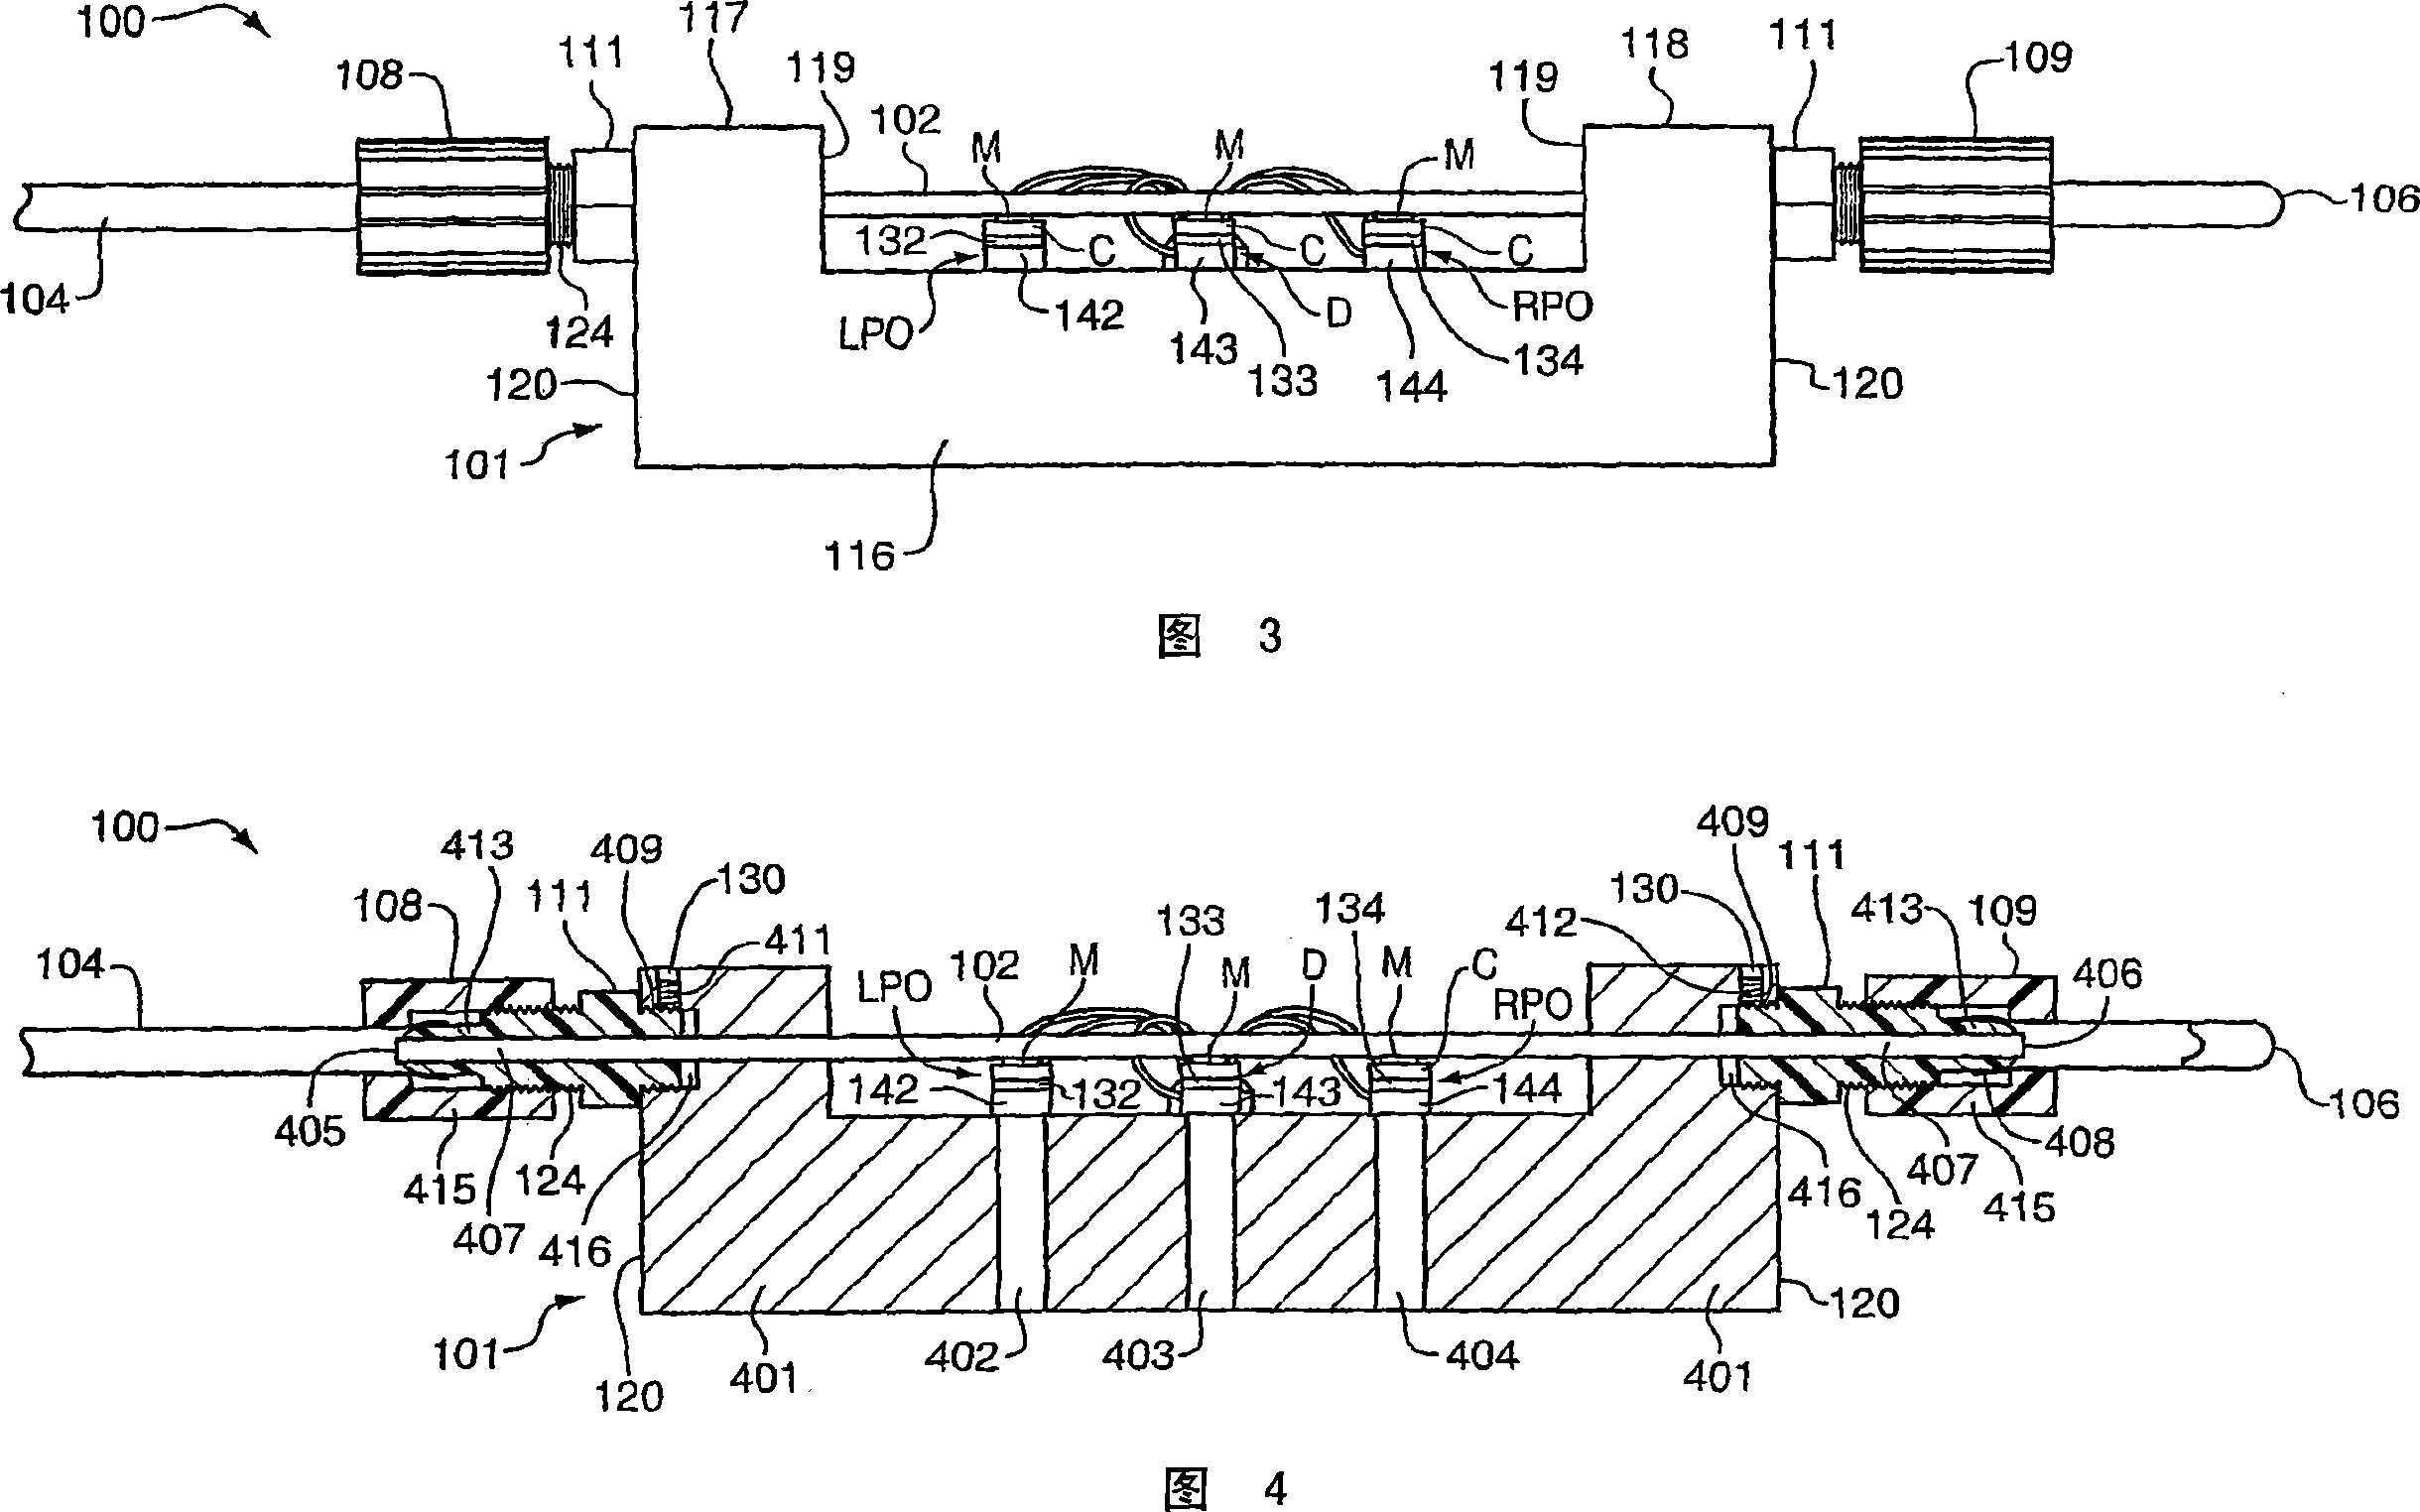 Compensation method and apparatus for a coriolis flow meter